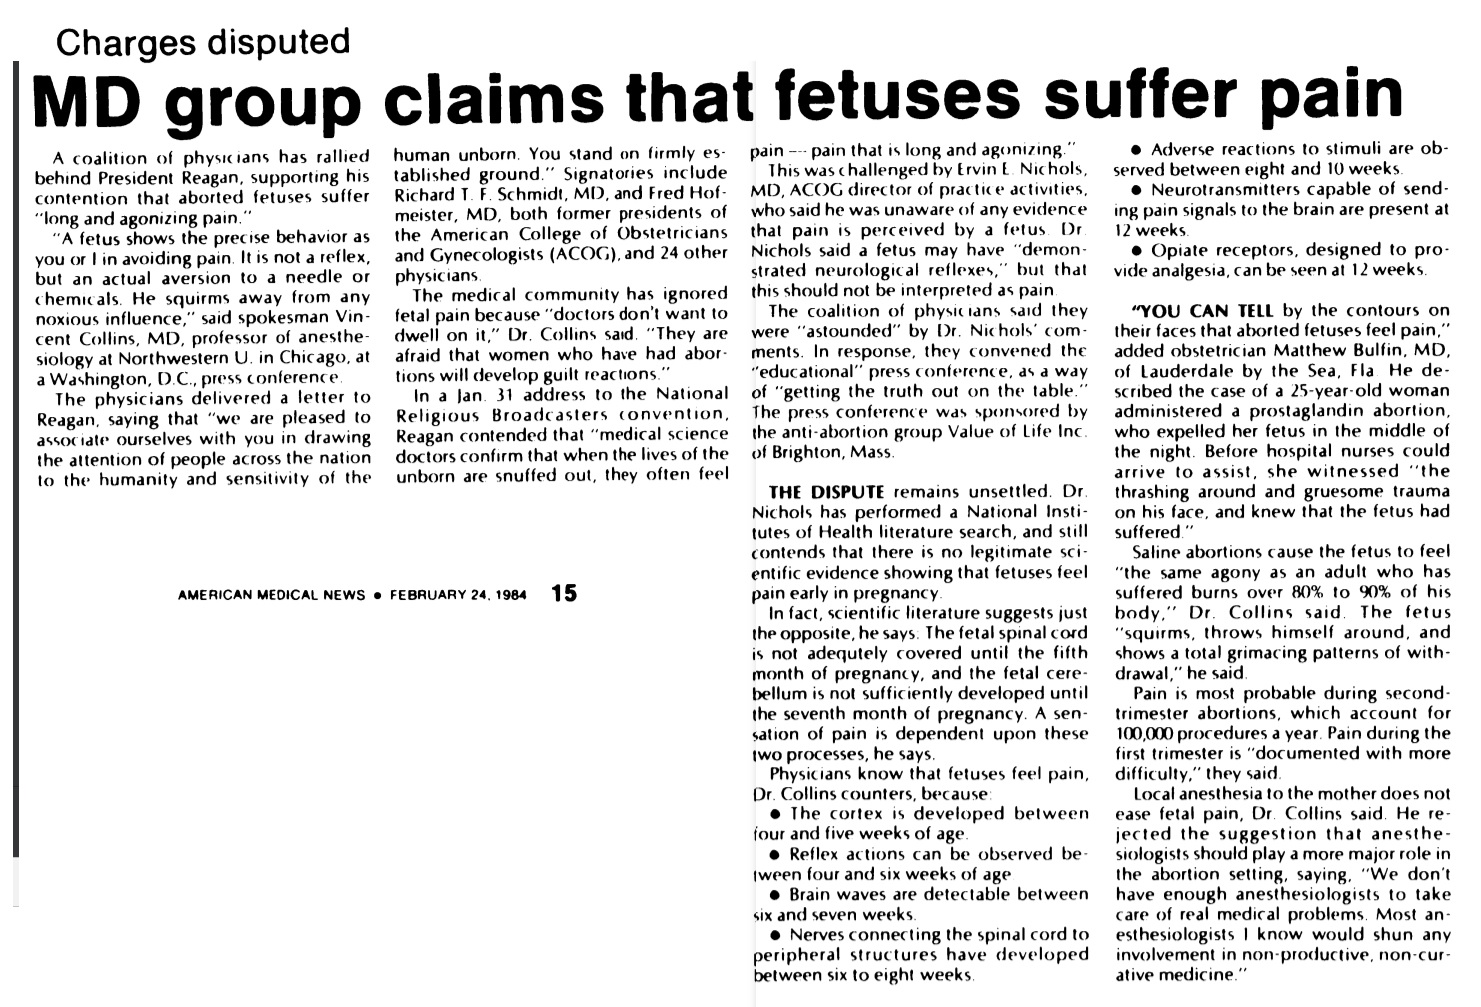 Image: American Medical News MD Group claims fetuses suffer pain 02241984